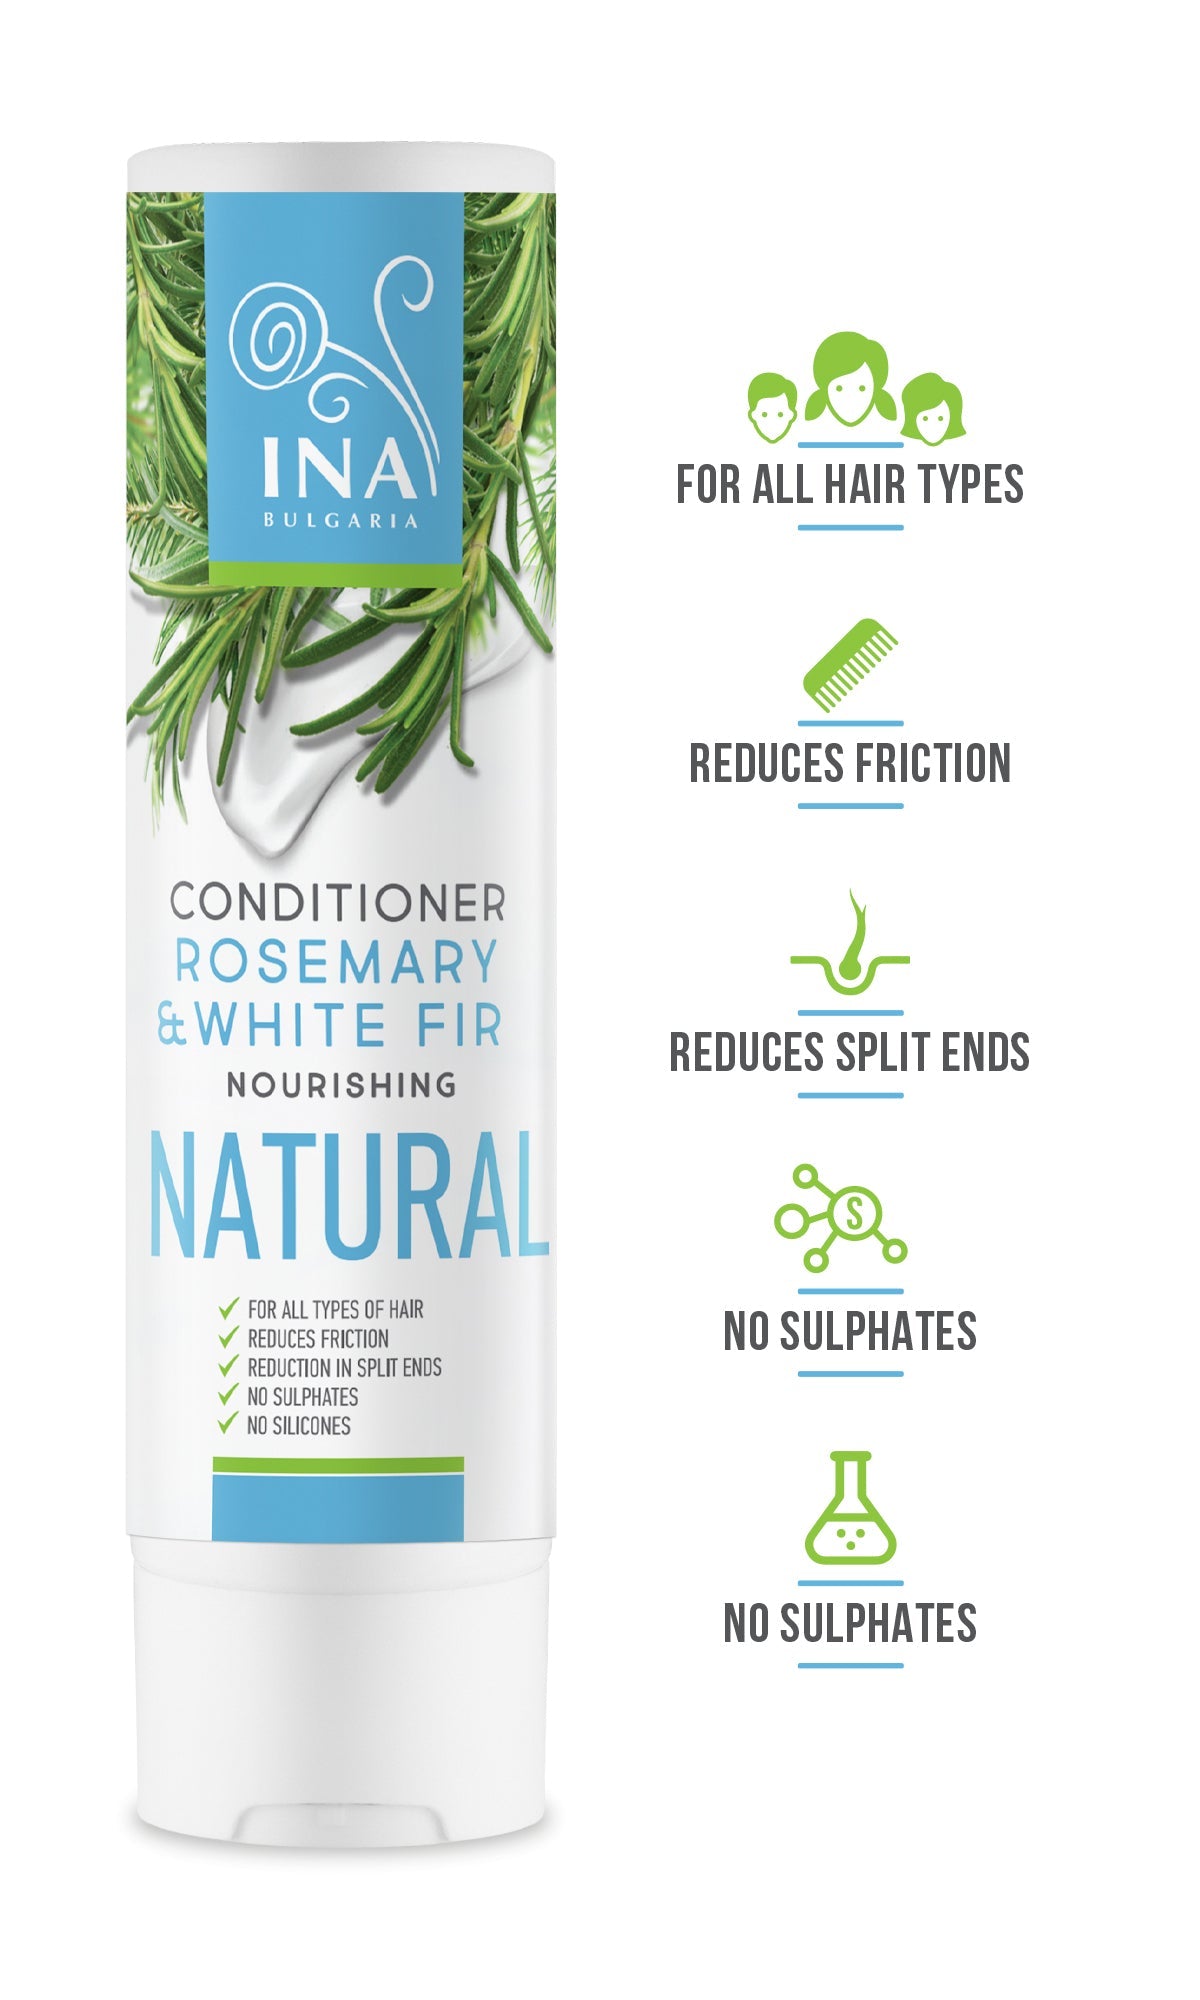 Natural Hair Conditioner with Rosemary and White Fir (250ml)